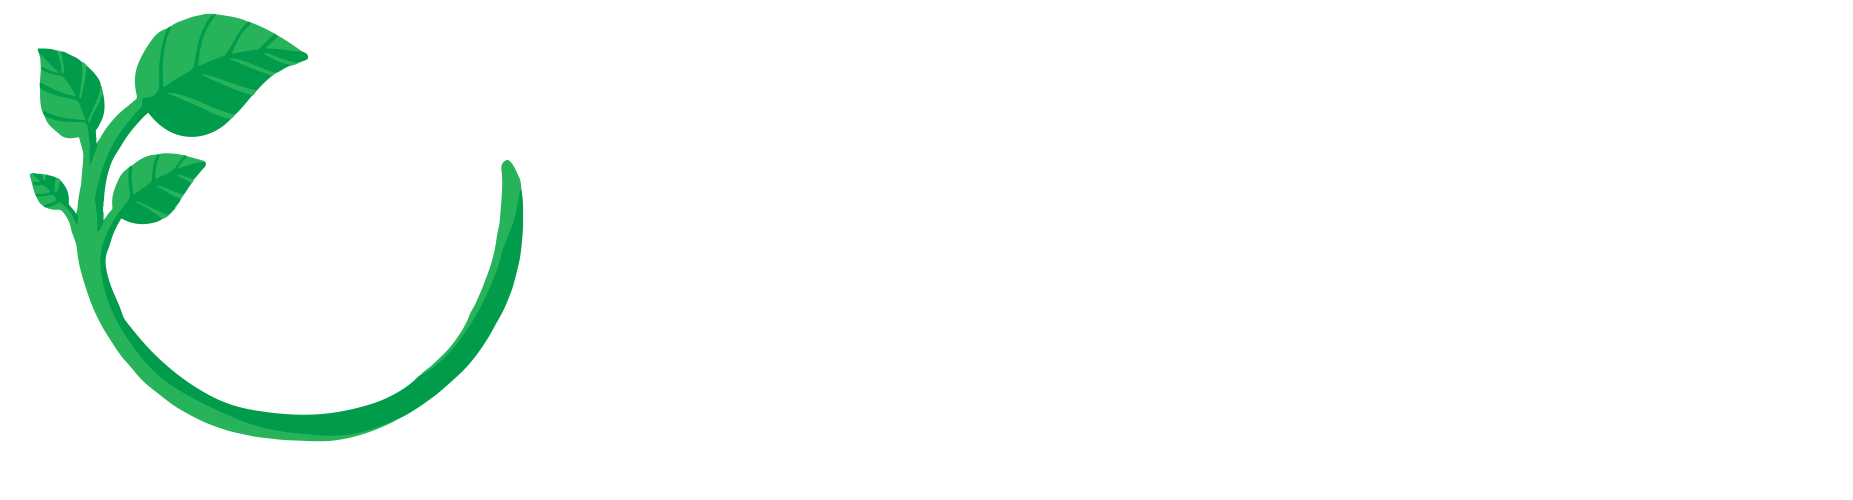 The Responsible Schools Project